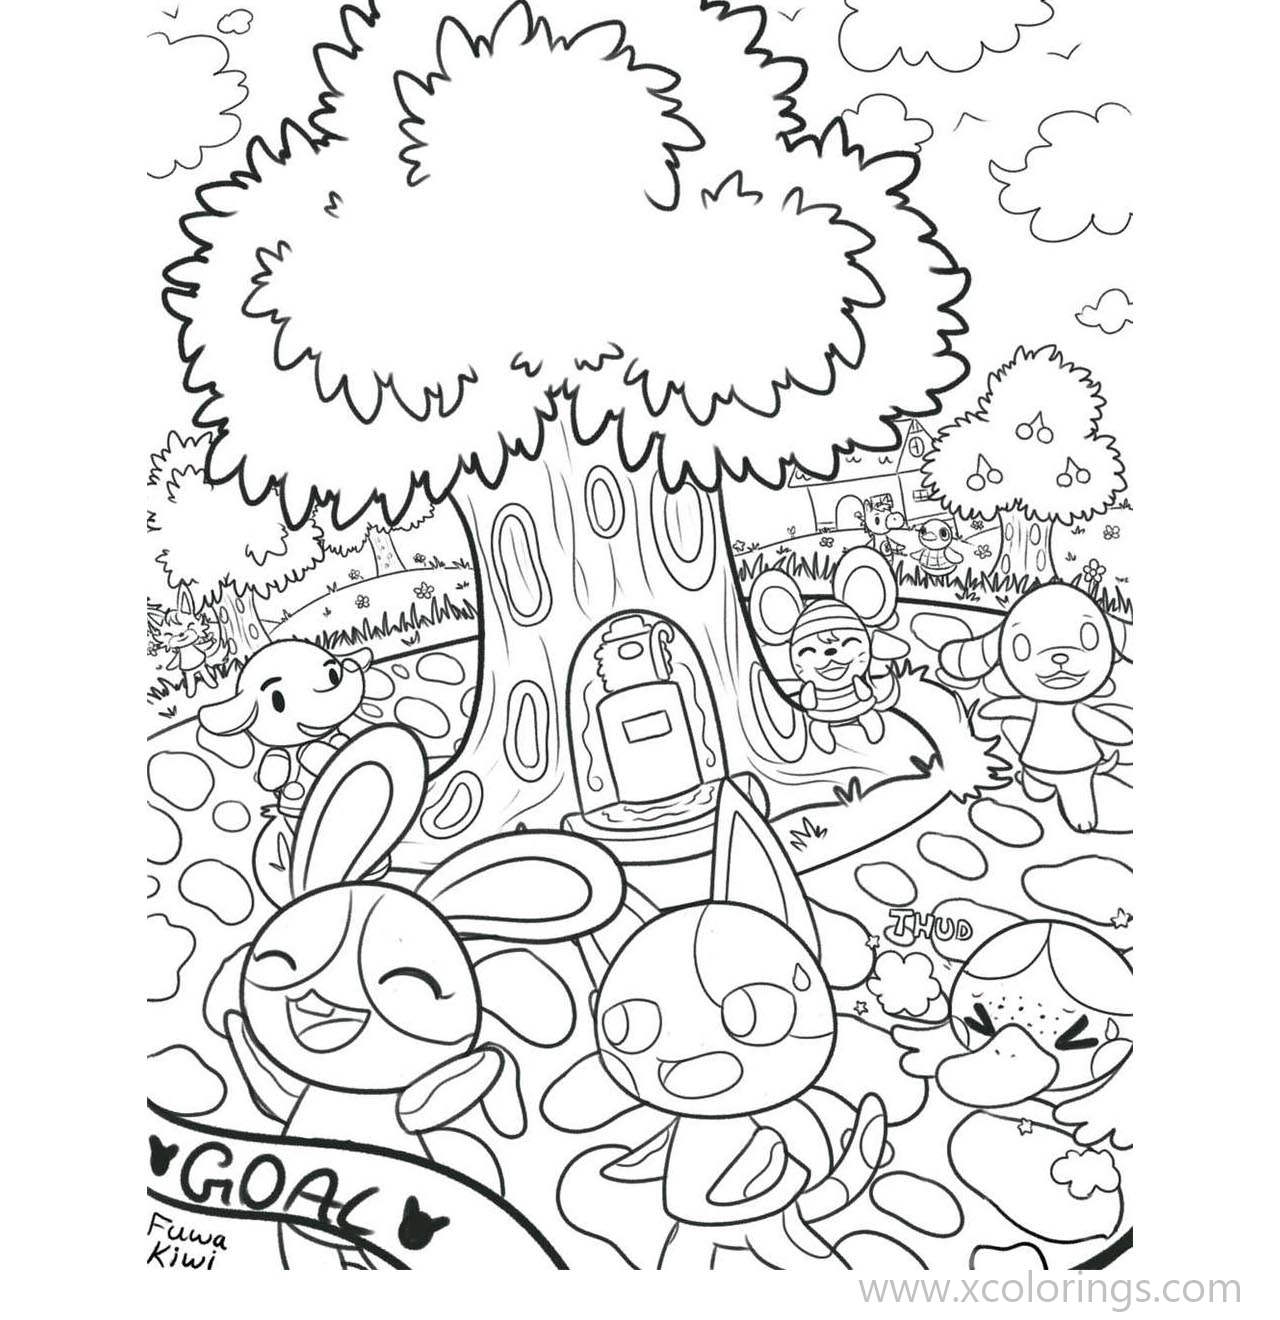 Free Animal Crossing Coloring Pages Play Under the Tree printable